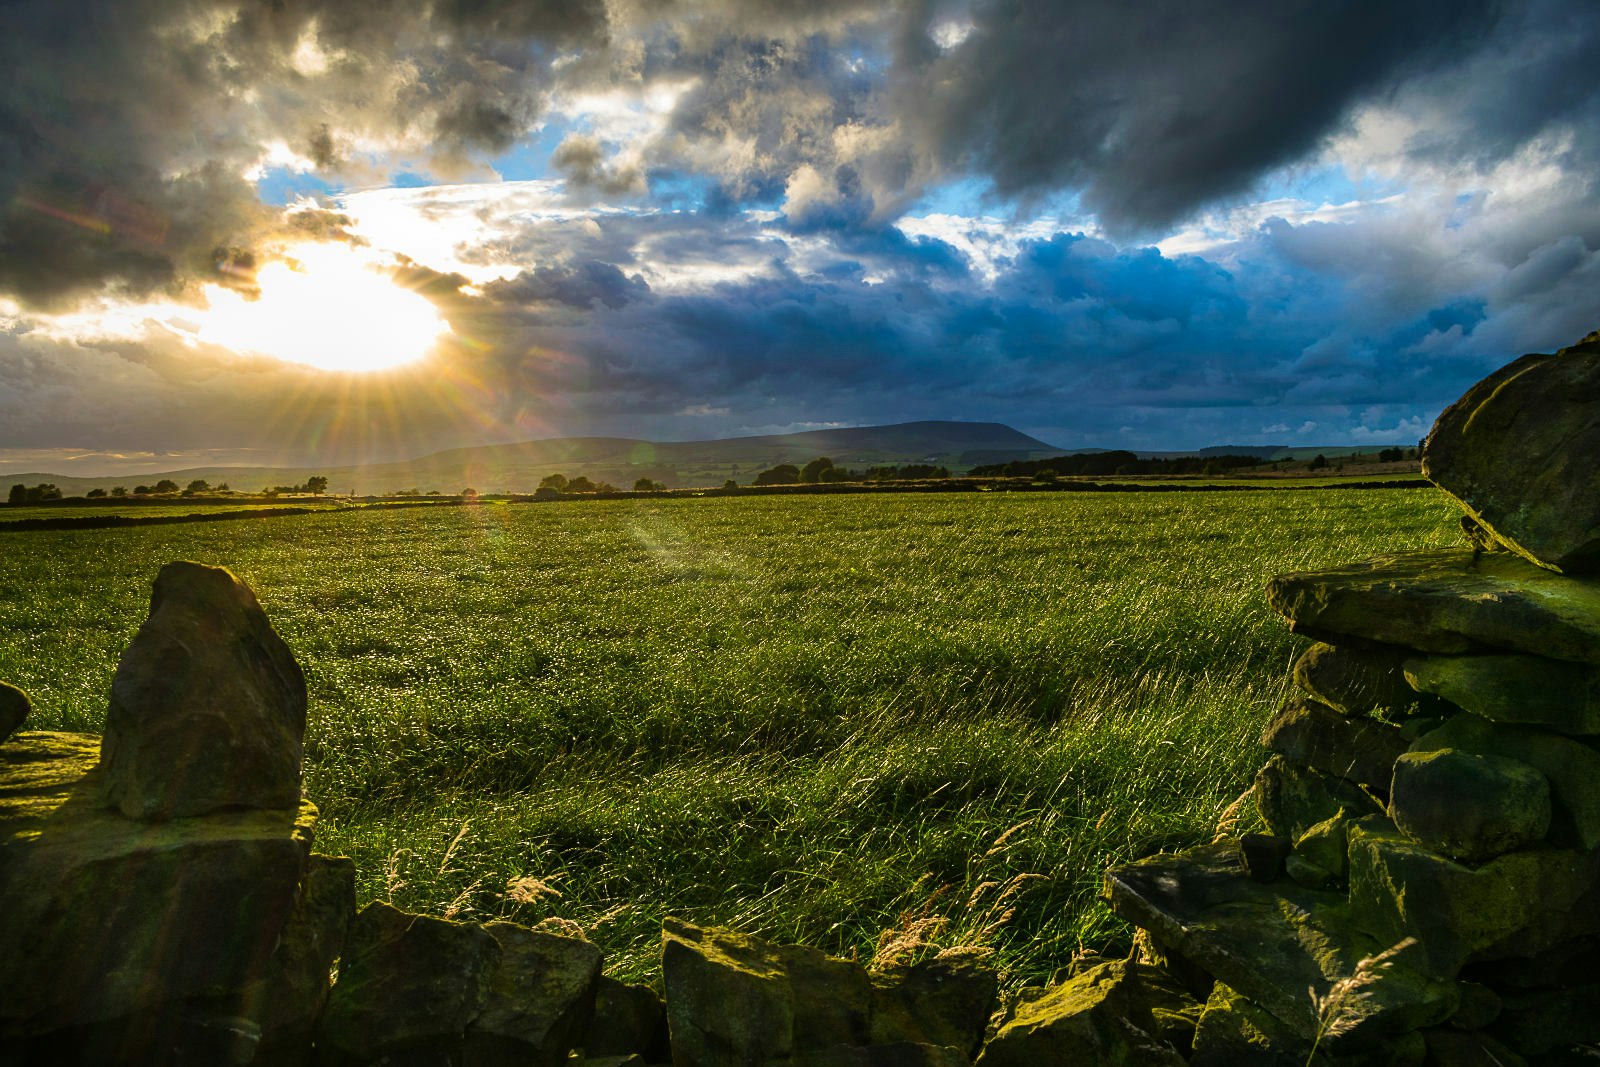 A stone wall at the foreground of the image framing grass and the sun peeking out from behind cloud cover with a hill in shadow in the background.